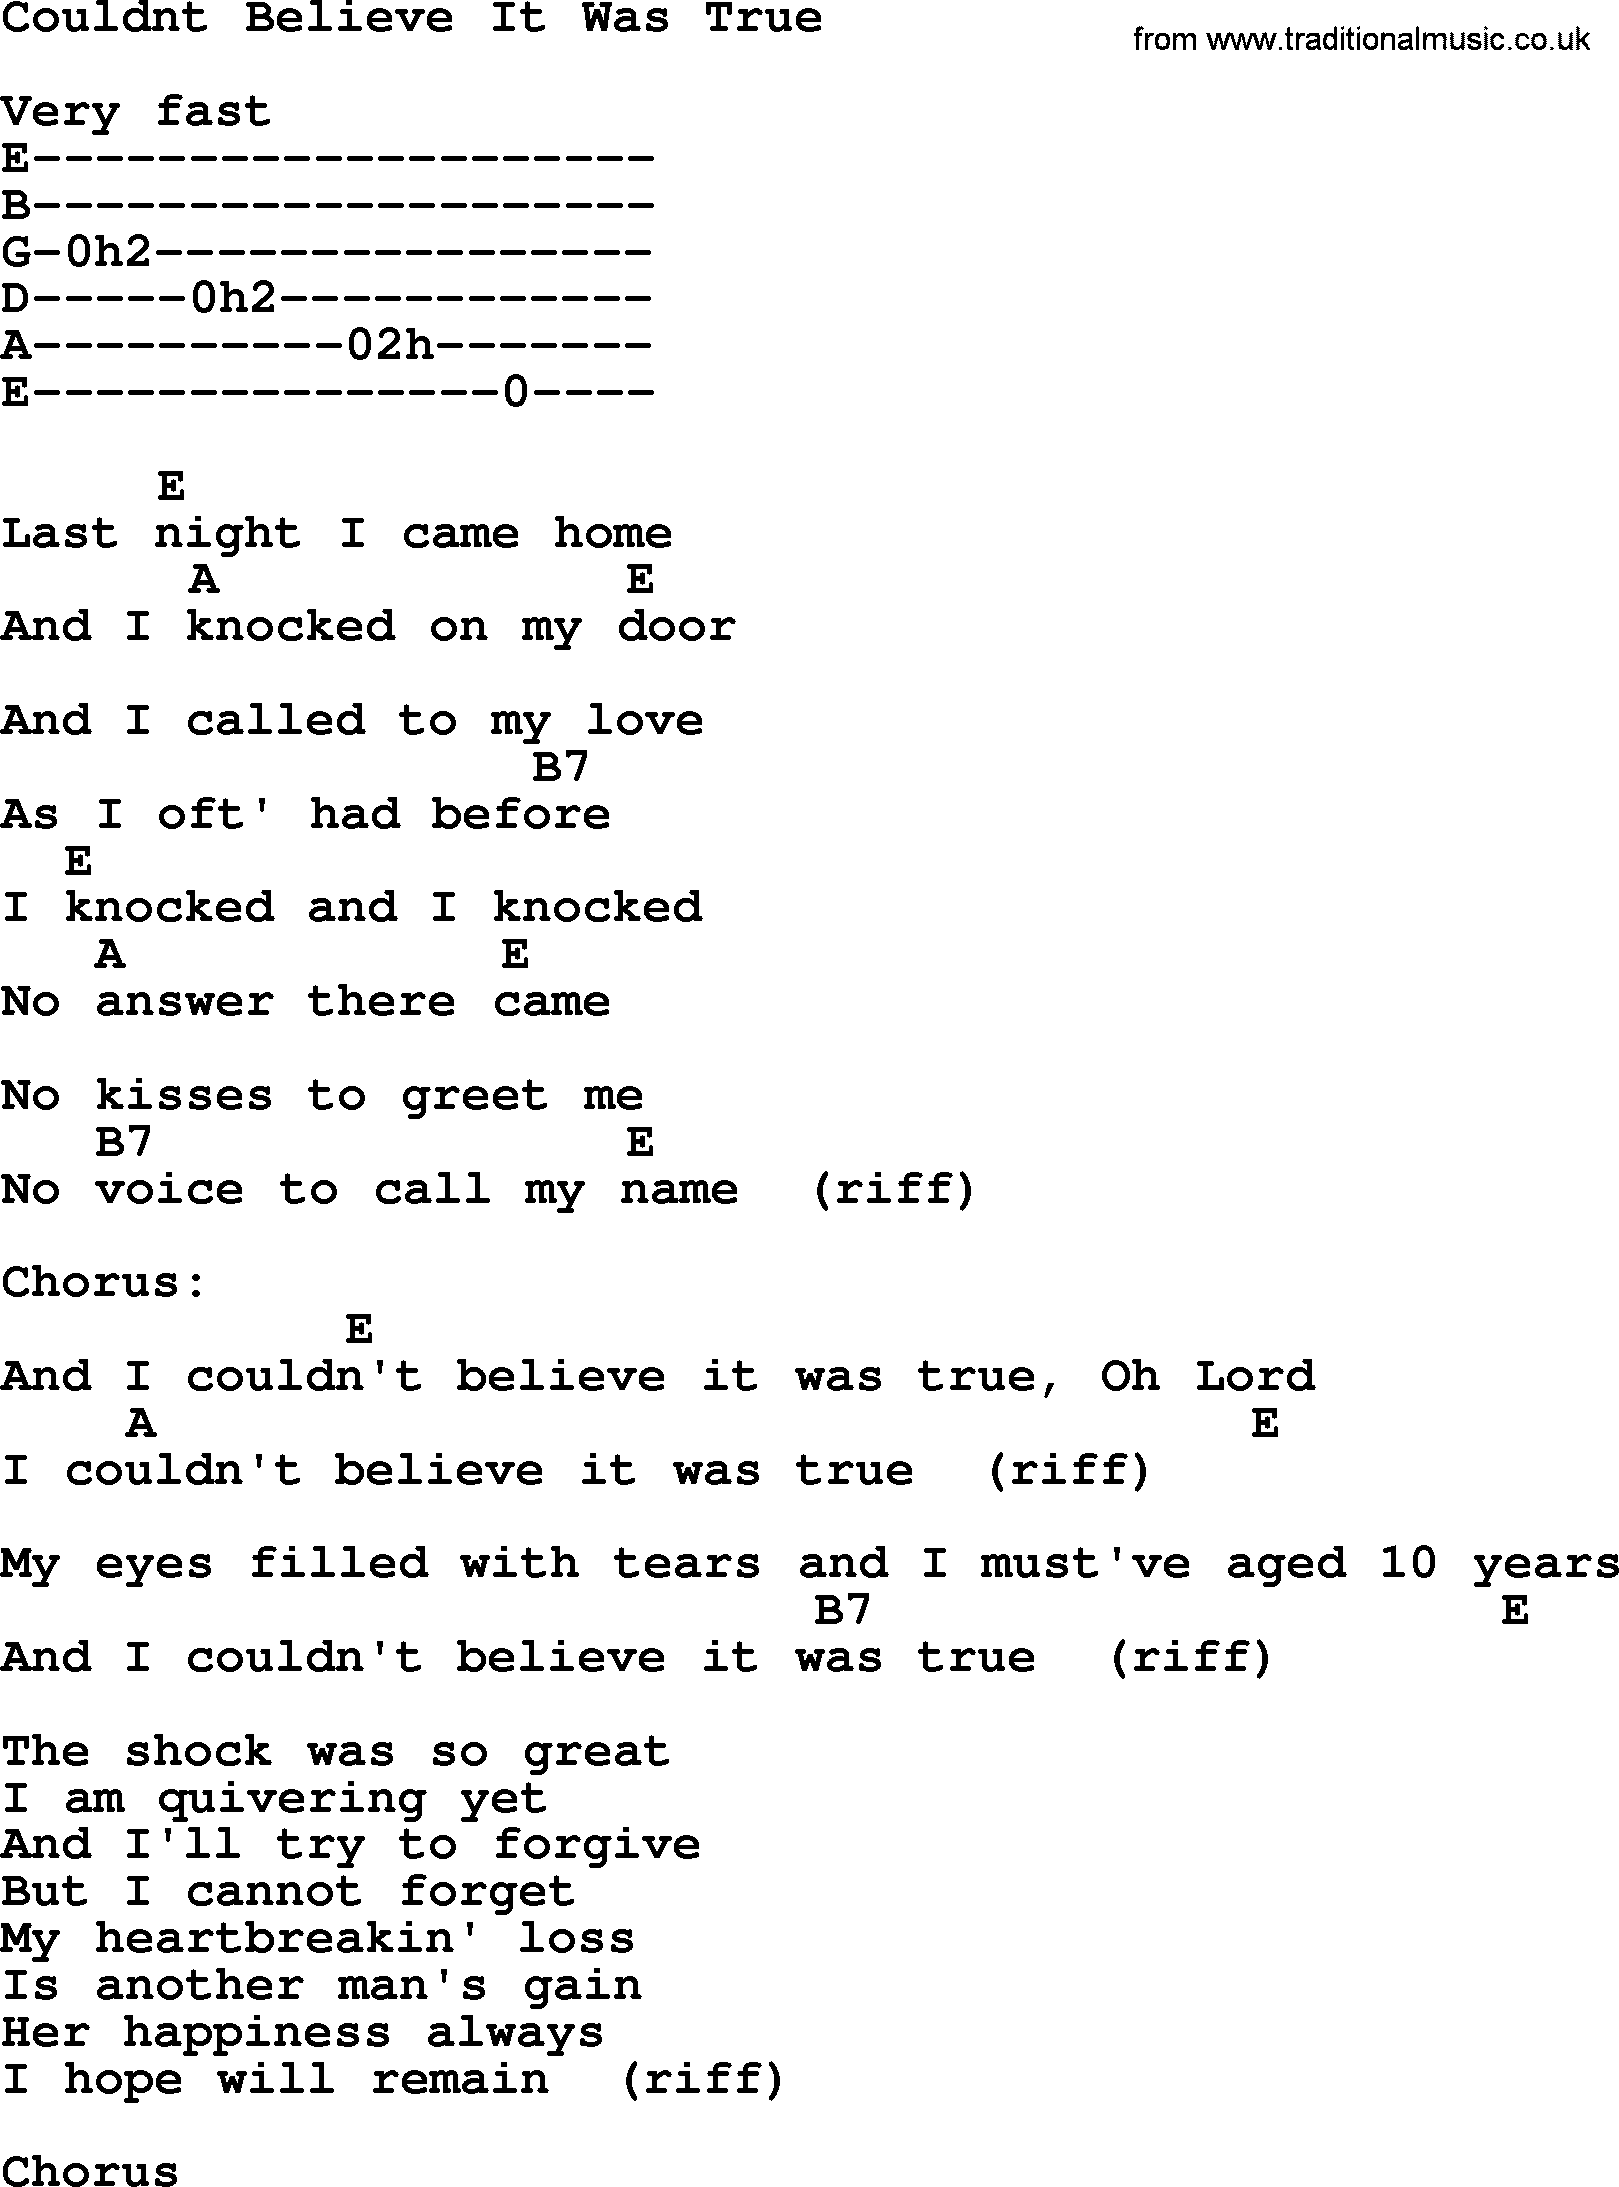 Willie Nelson song: Couldnt Believe It Was True, lyrics and chords